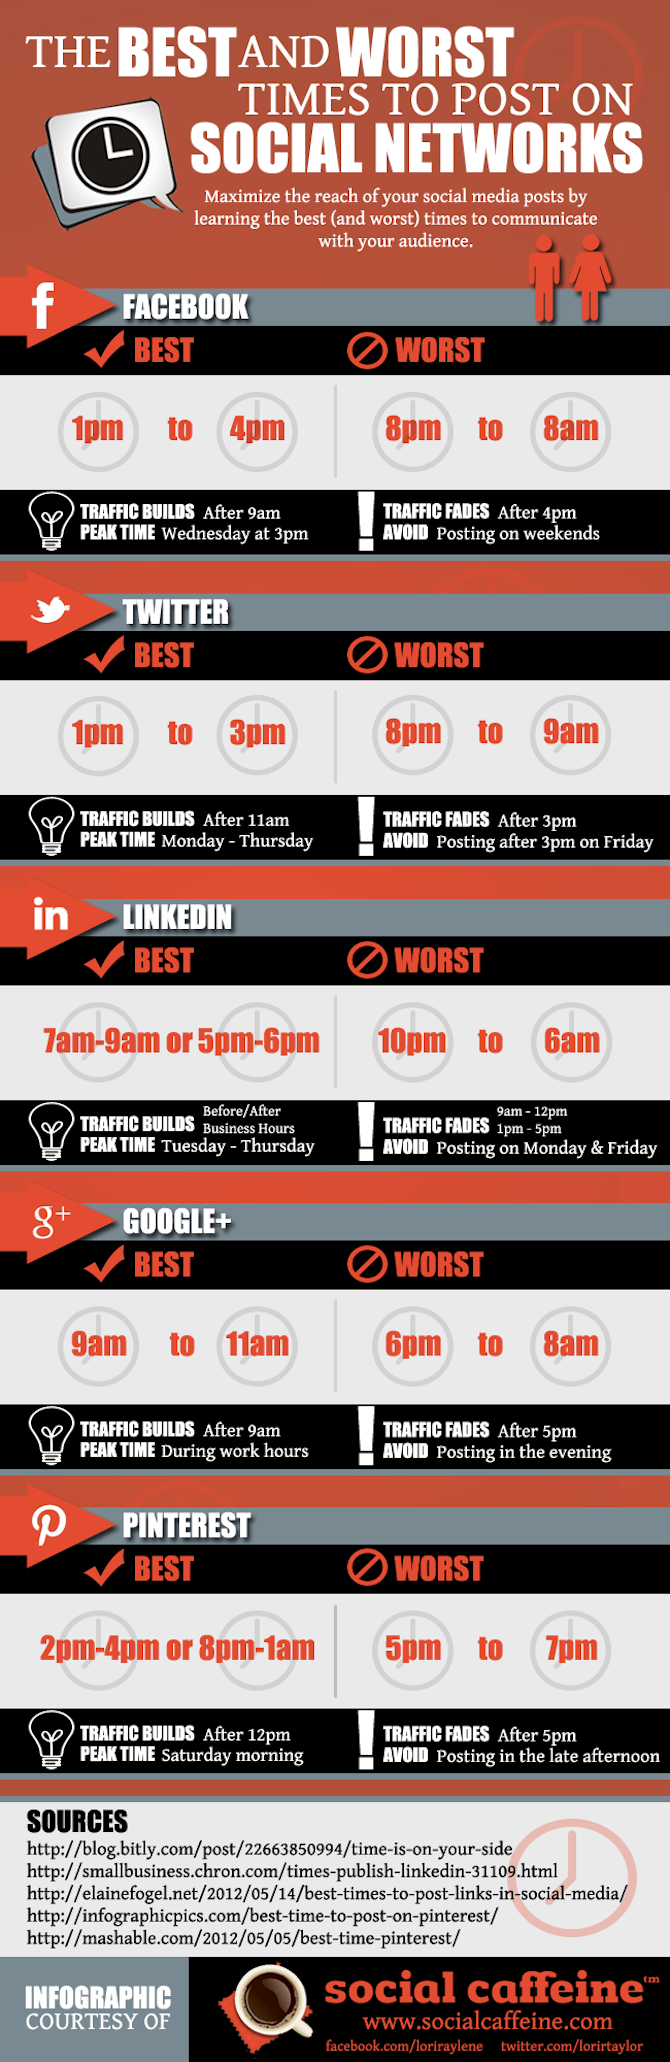 The best and worst times to post on social networks